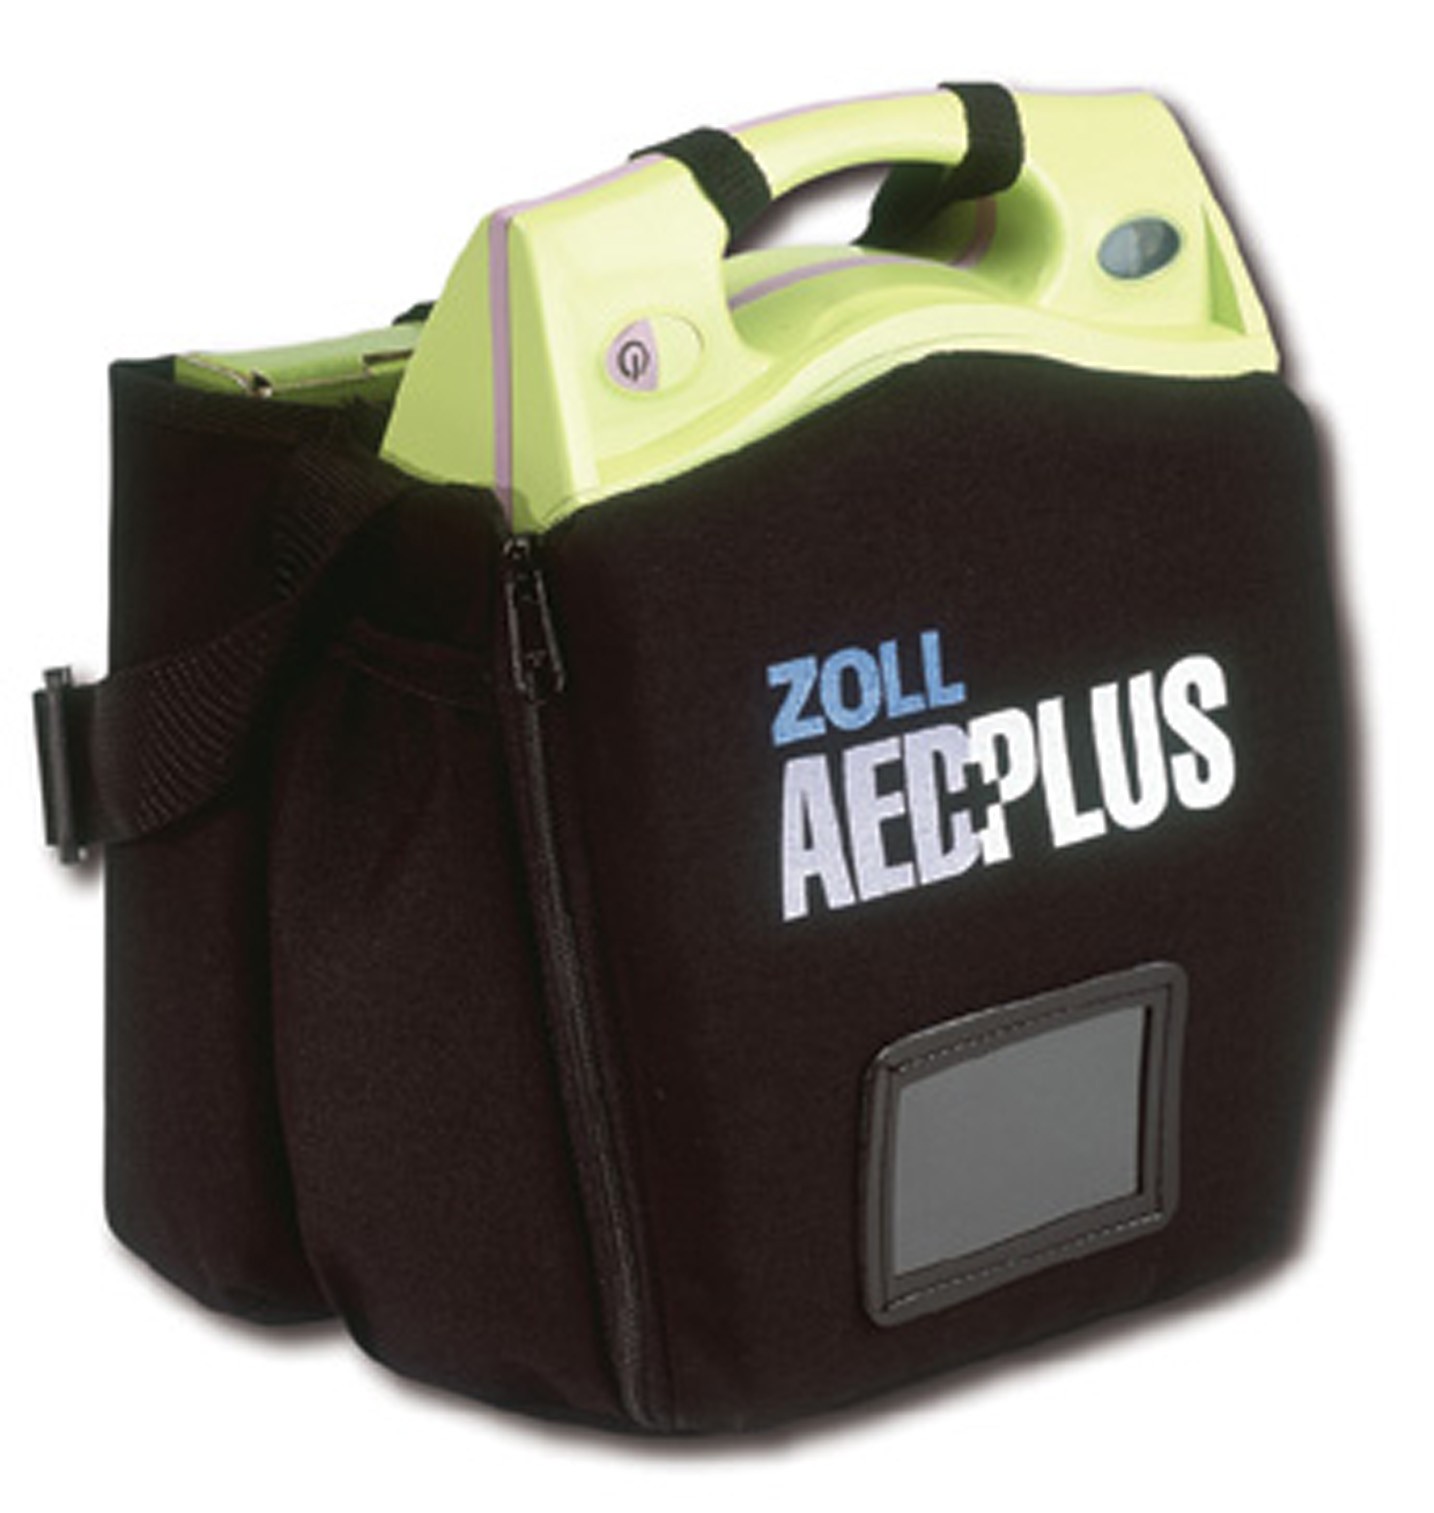 Zoll AED Plus package with wall mount